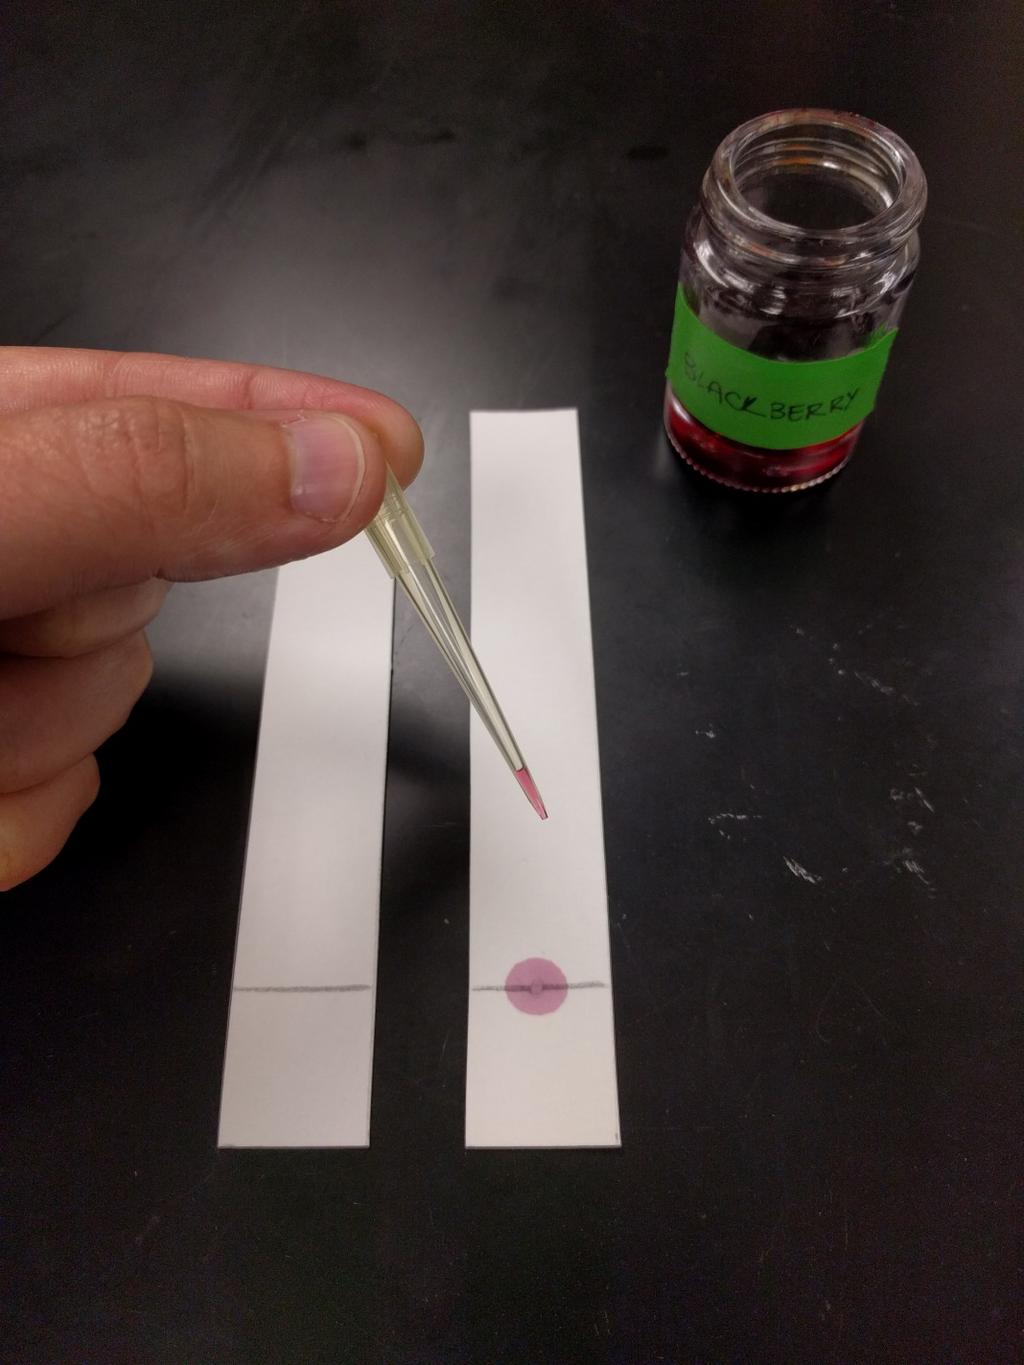 Figure 3. Strips of chromatography paper with a pencil mark at 2 cm. The strip on the right already received some of the blackberry solution.